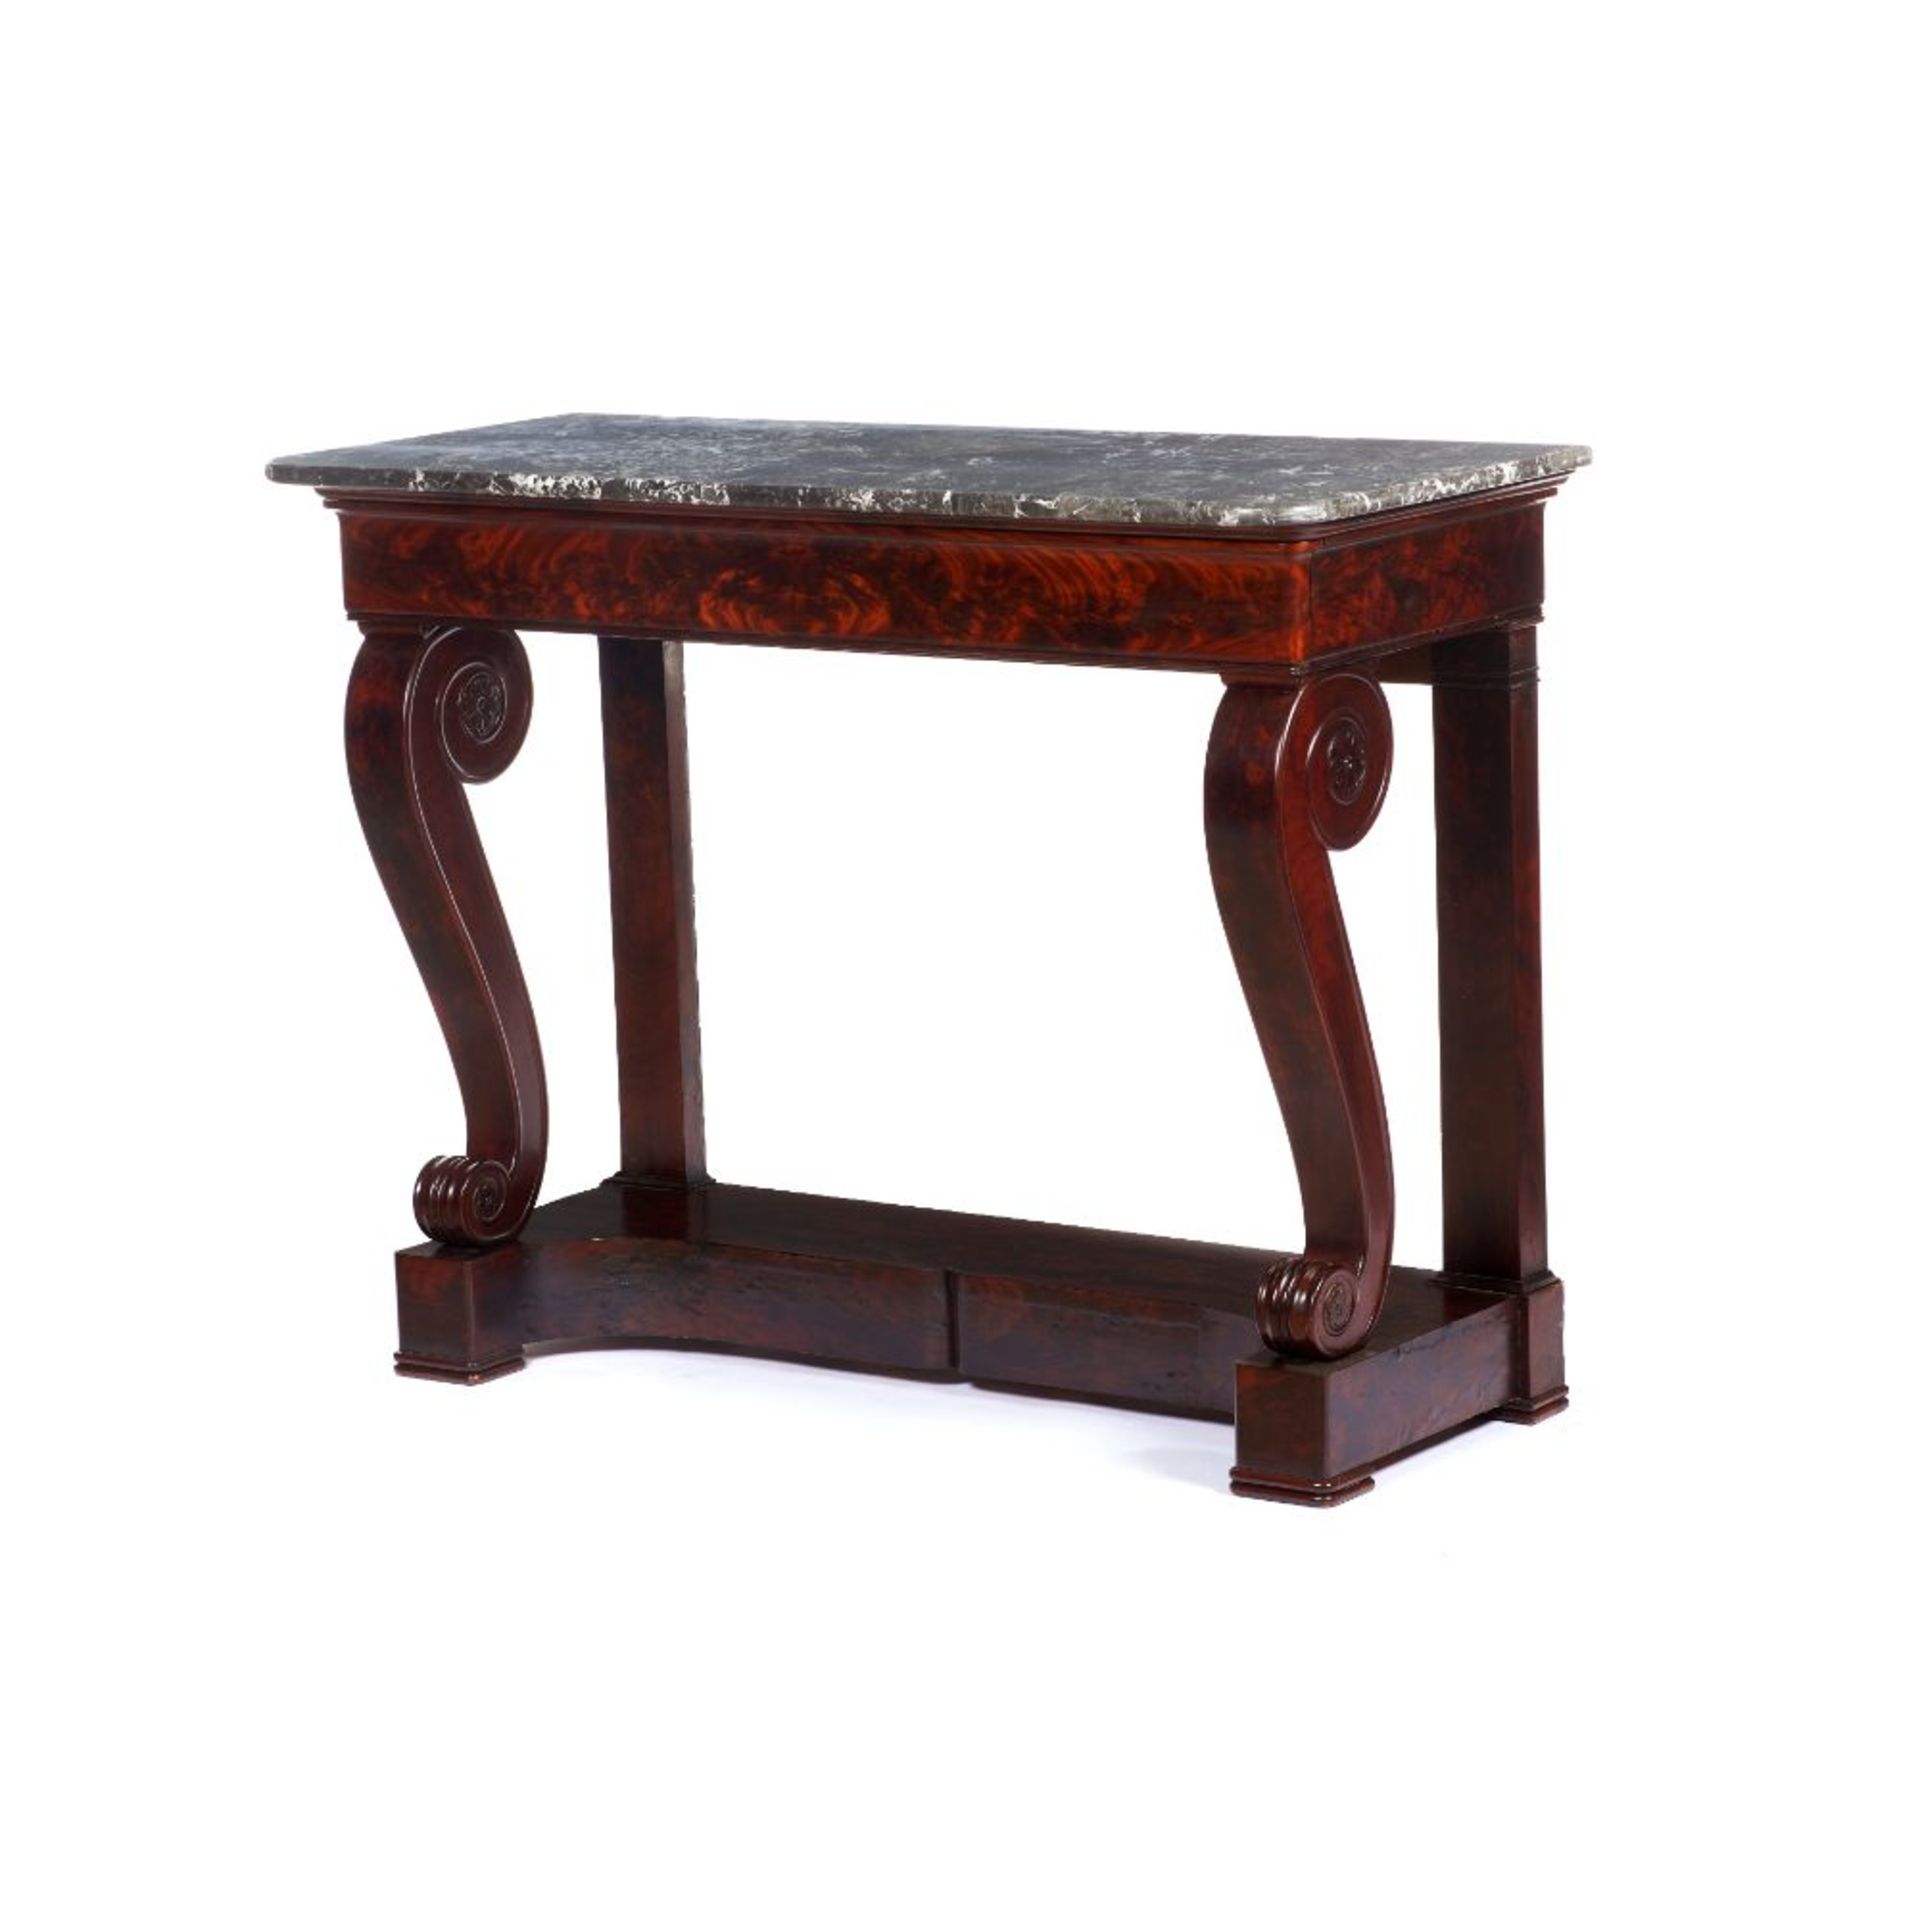 A pair of Louis-Philippe consoles, Solid and veneered mahogany, Cabriole front legs, carved - Image 2 of 2